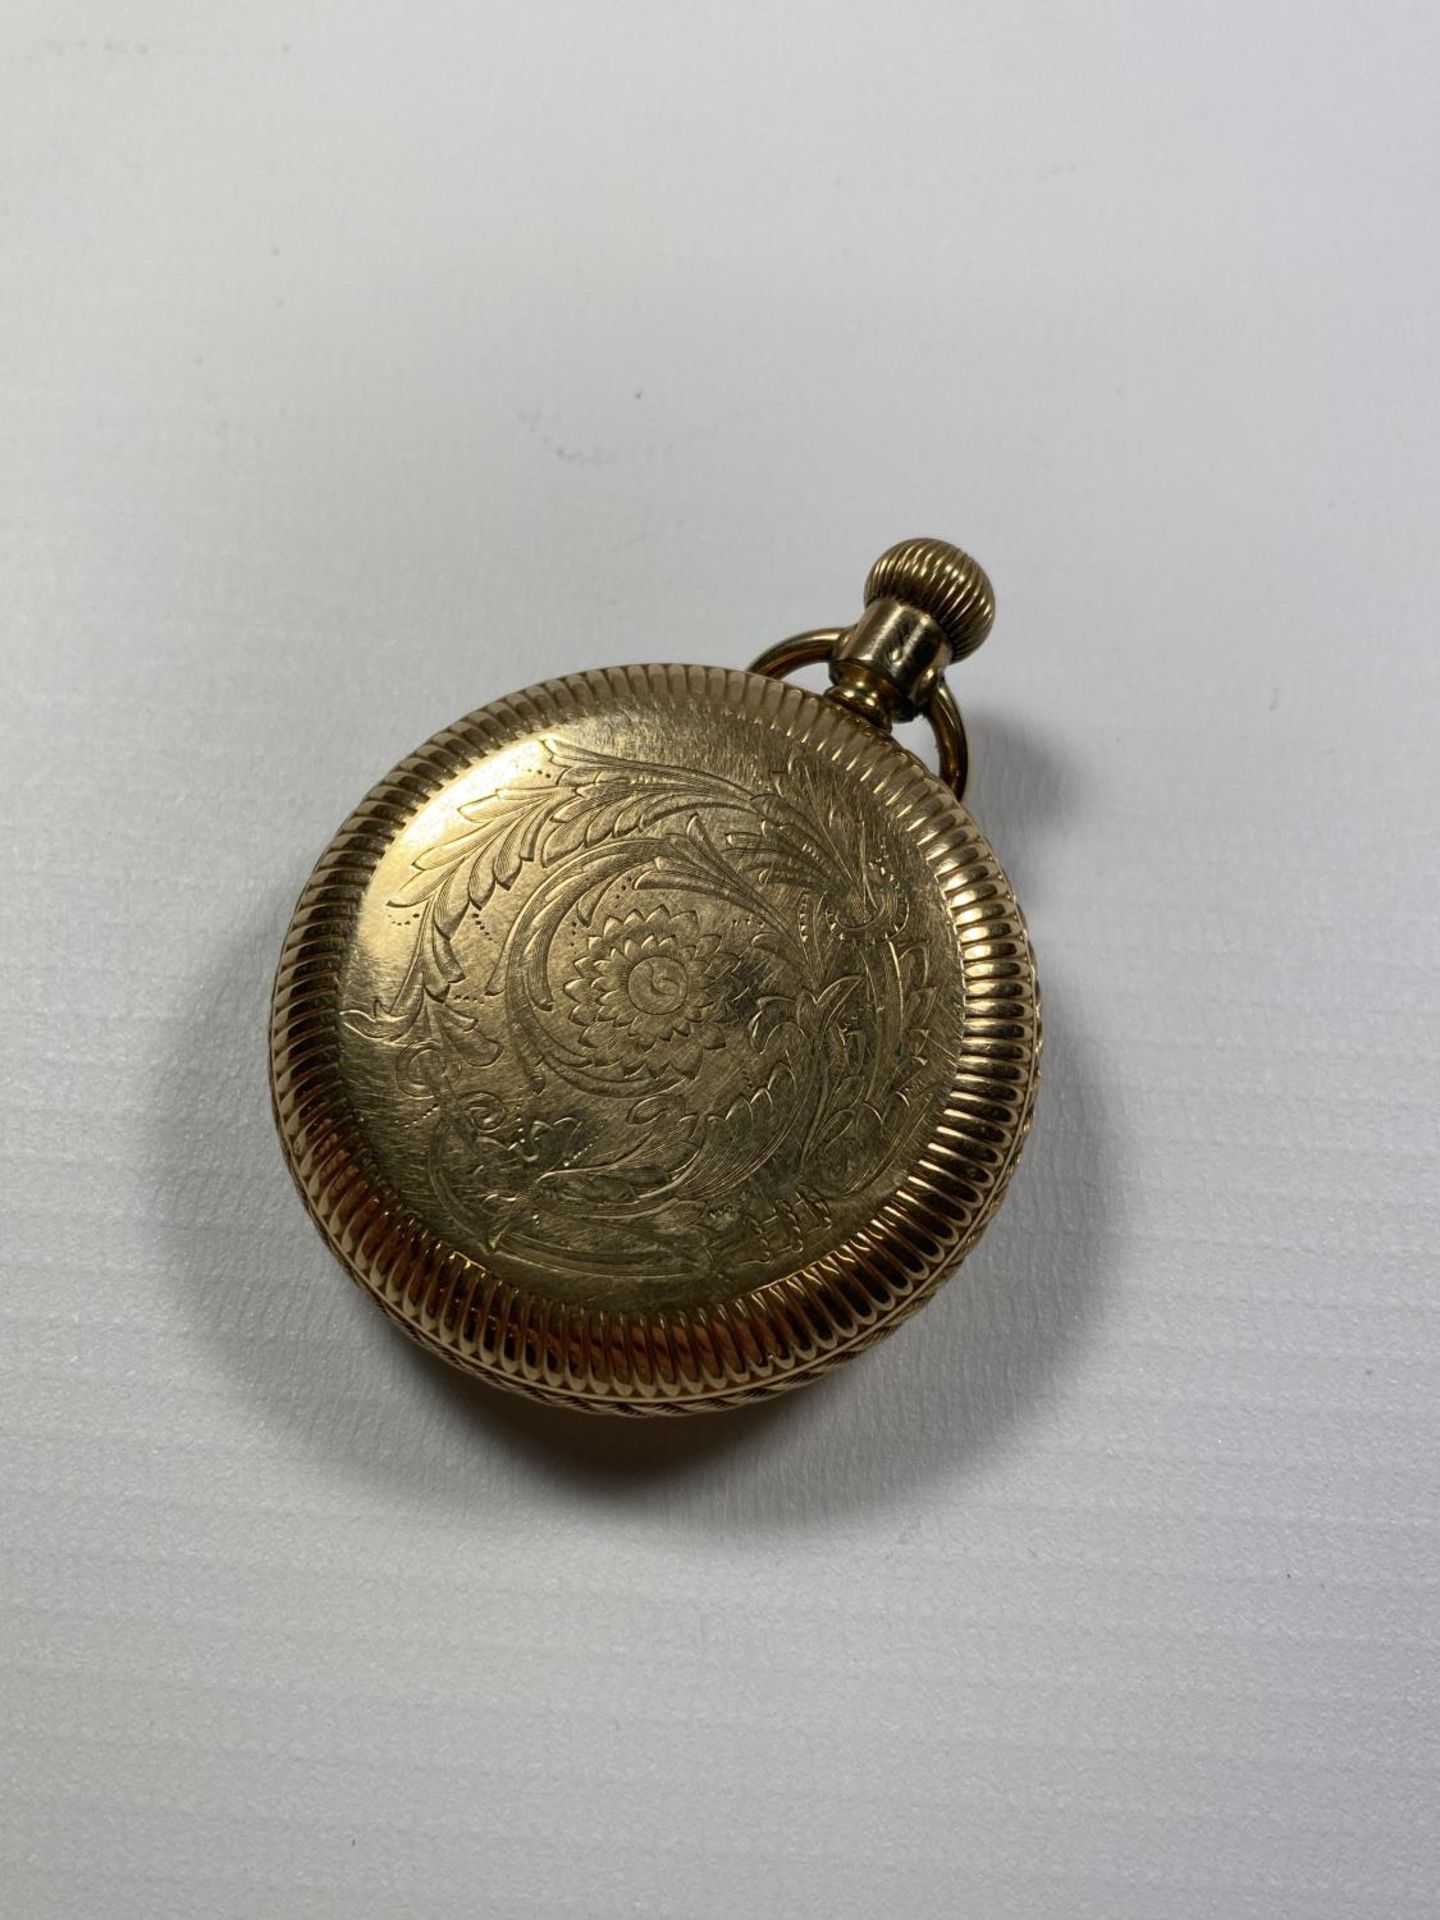 A VINTAGE GOLD PLATED U.S.A OPEN FACED POCKET WATCH, SIGNED TO MOVEMENT, NUMBERED 802611 - Image 3 of 5